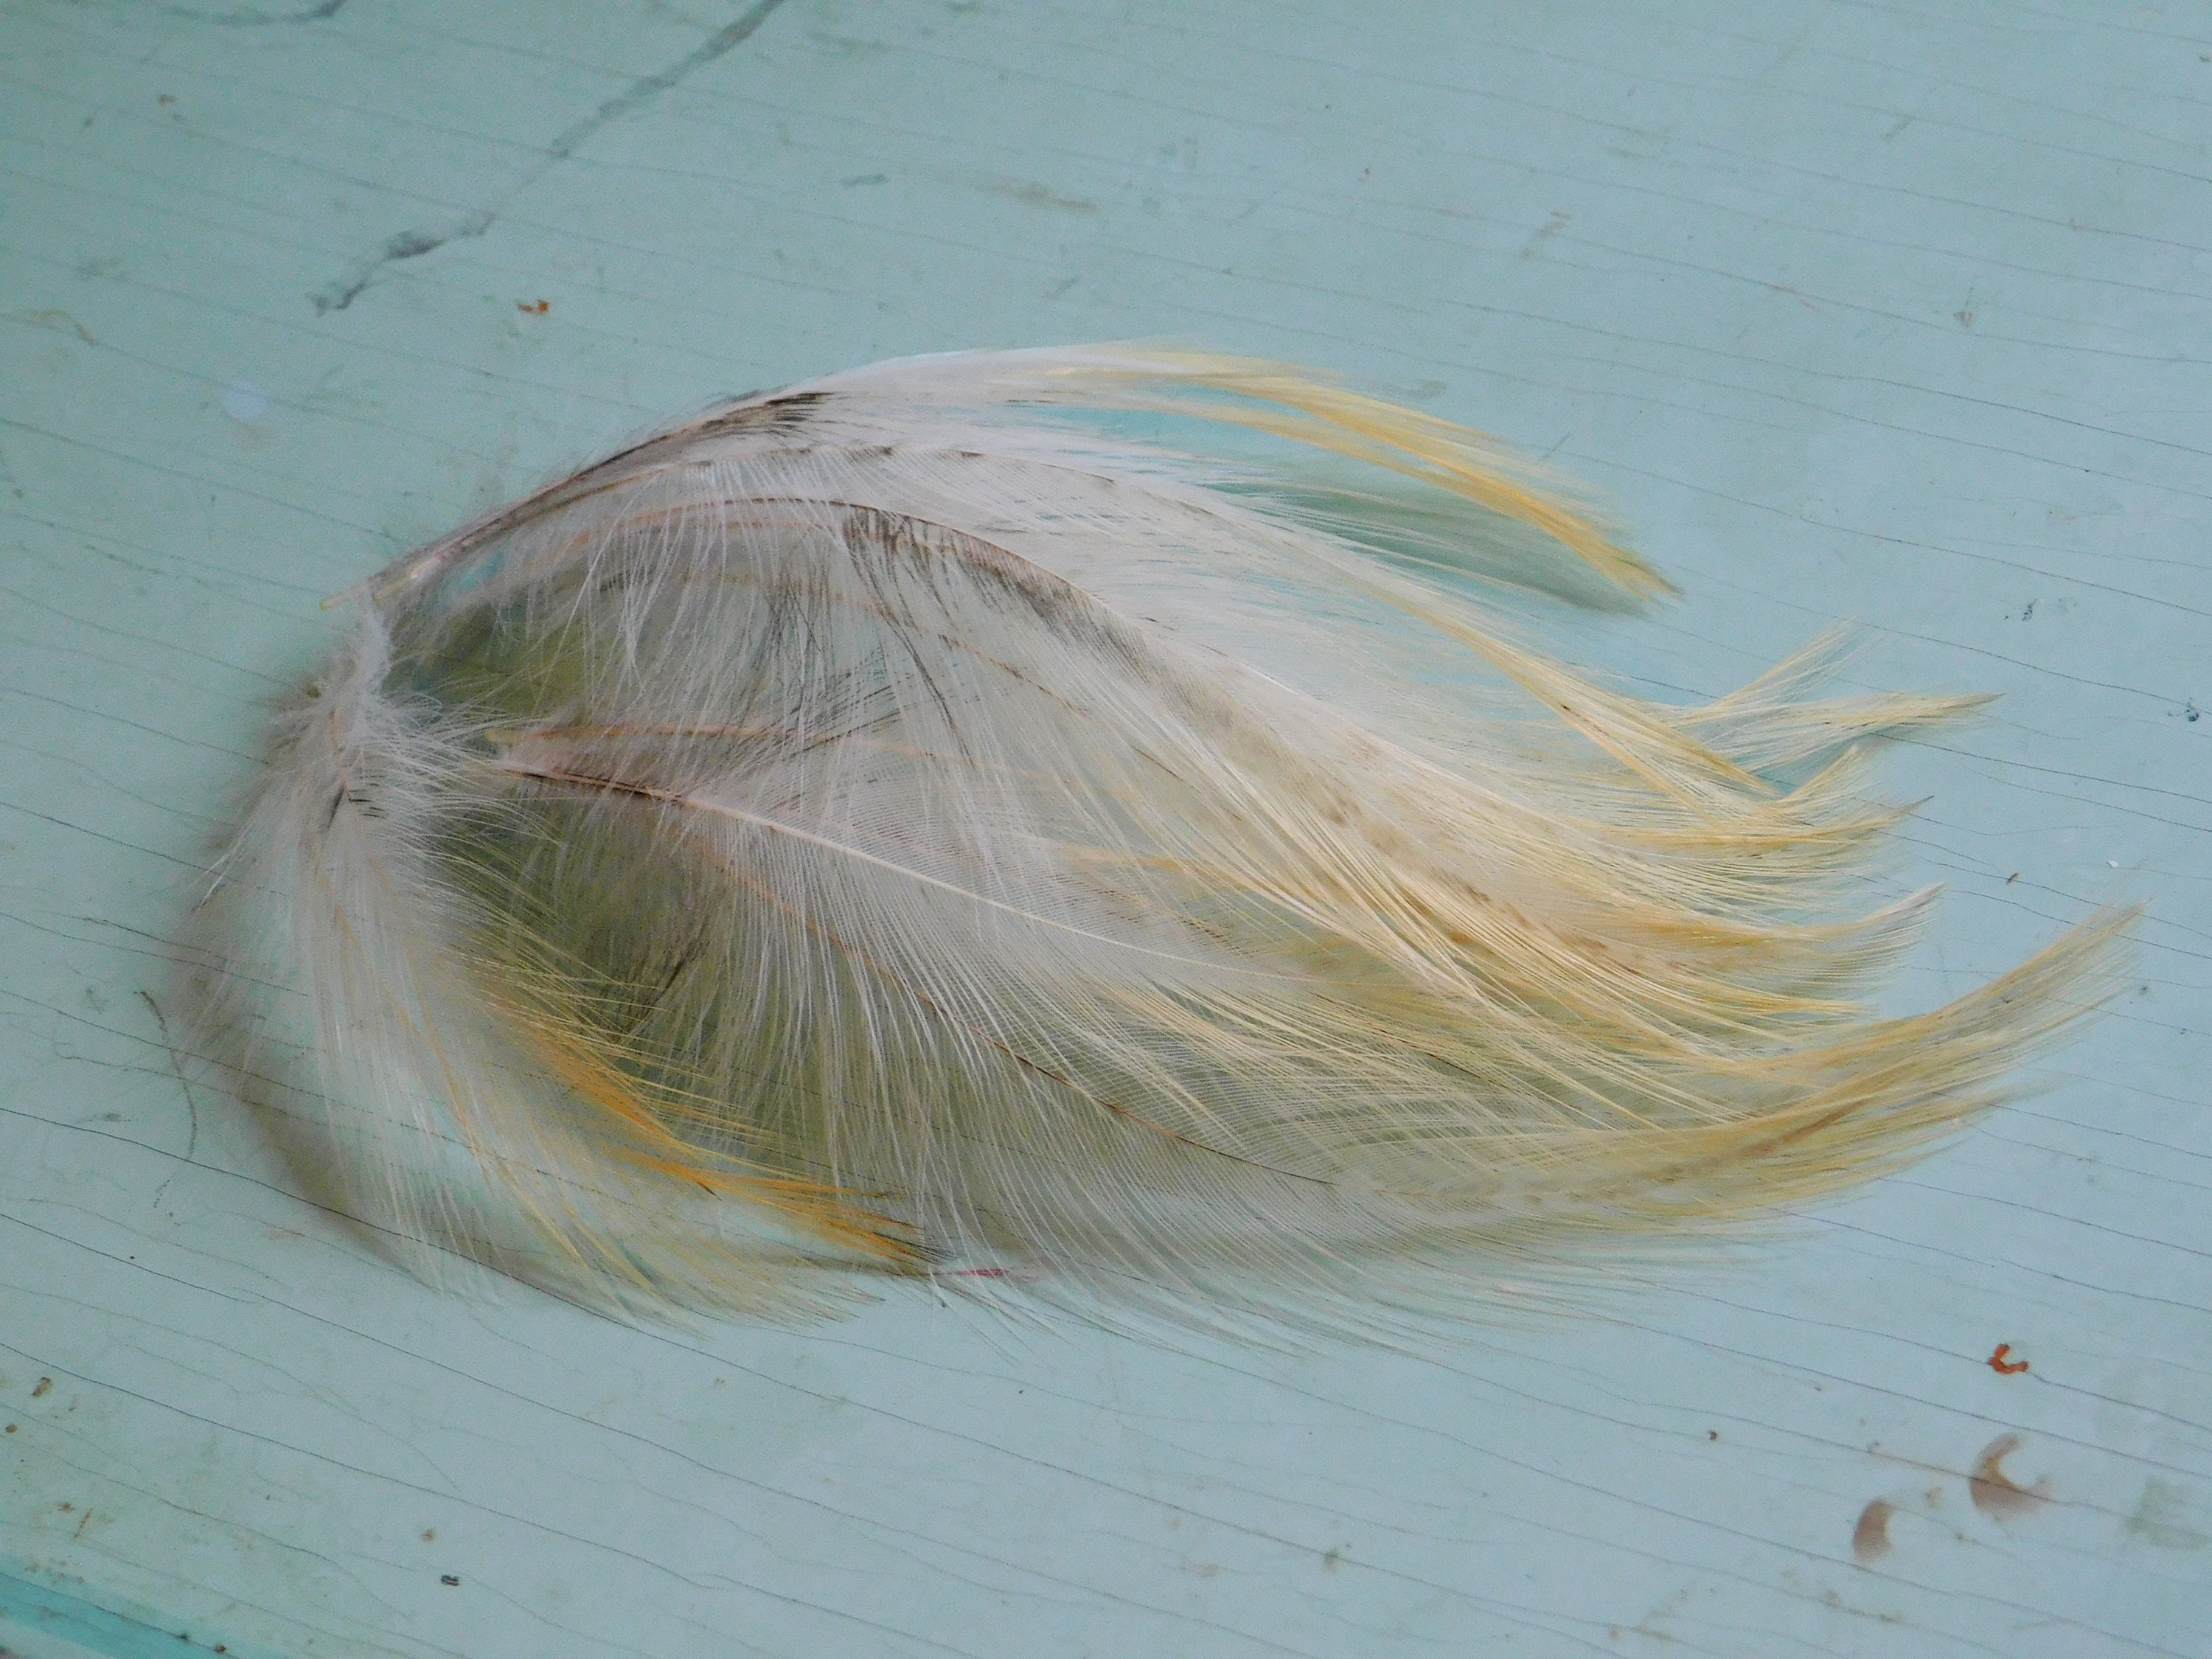 Craft Feathers, Feathers for Crafts